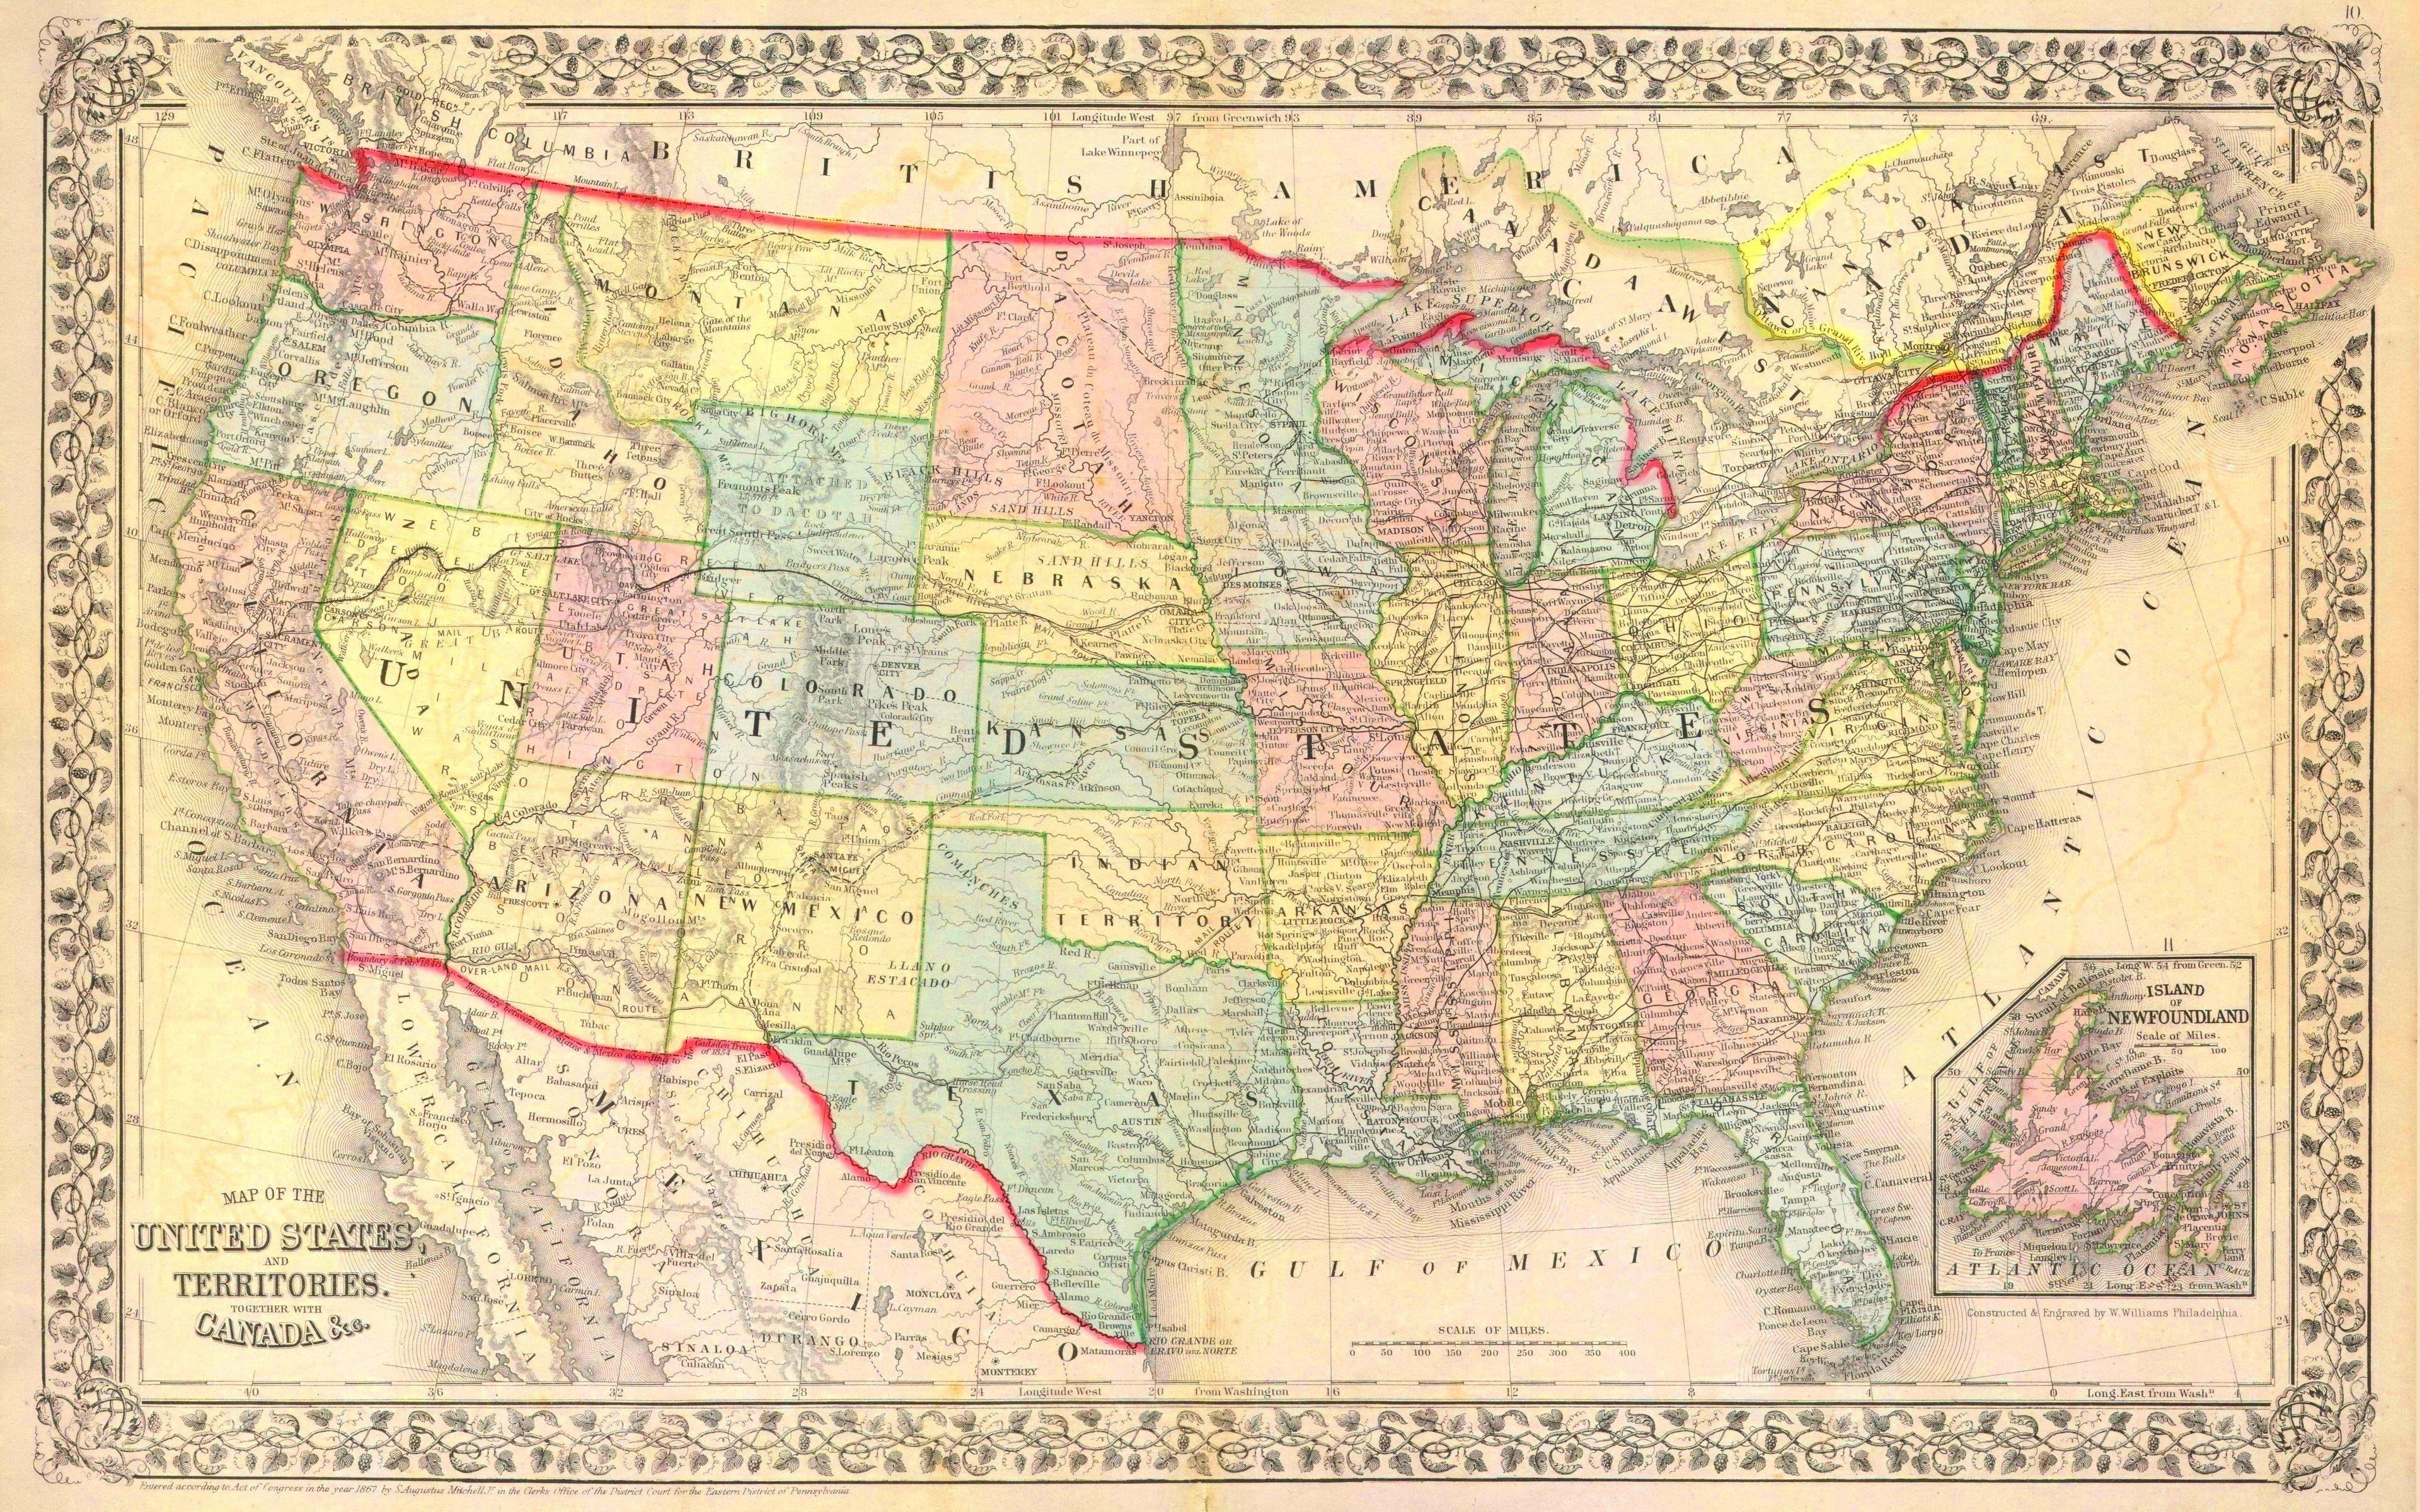 Download wallpaper USA, Old Map, administrative map, states, United States, geography for desktop with resolution 3840x2400. High Quality HD picture wallpaper